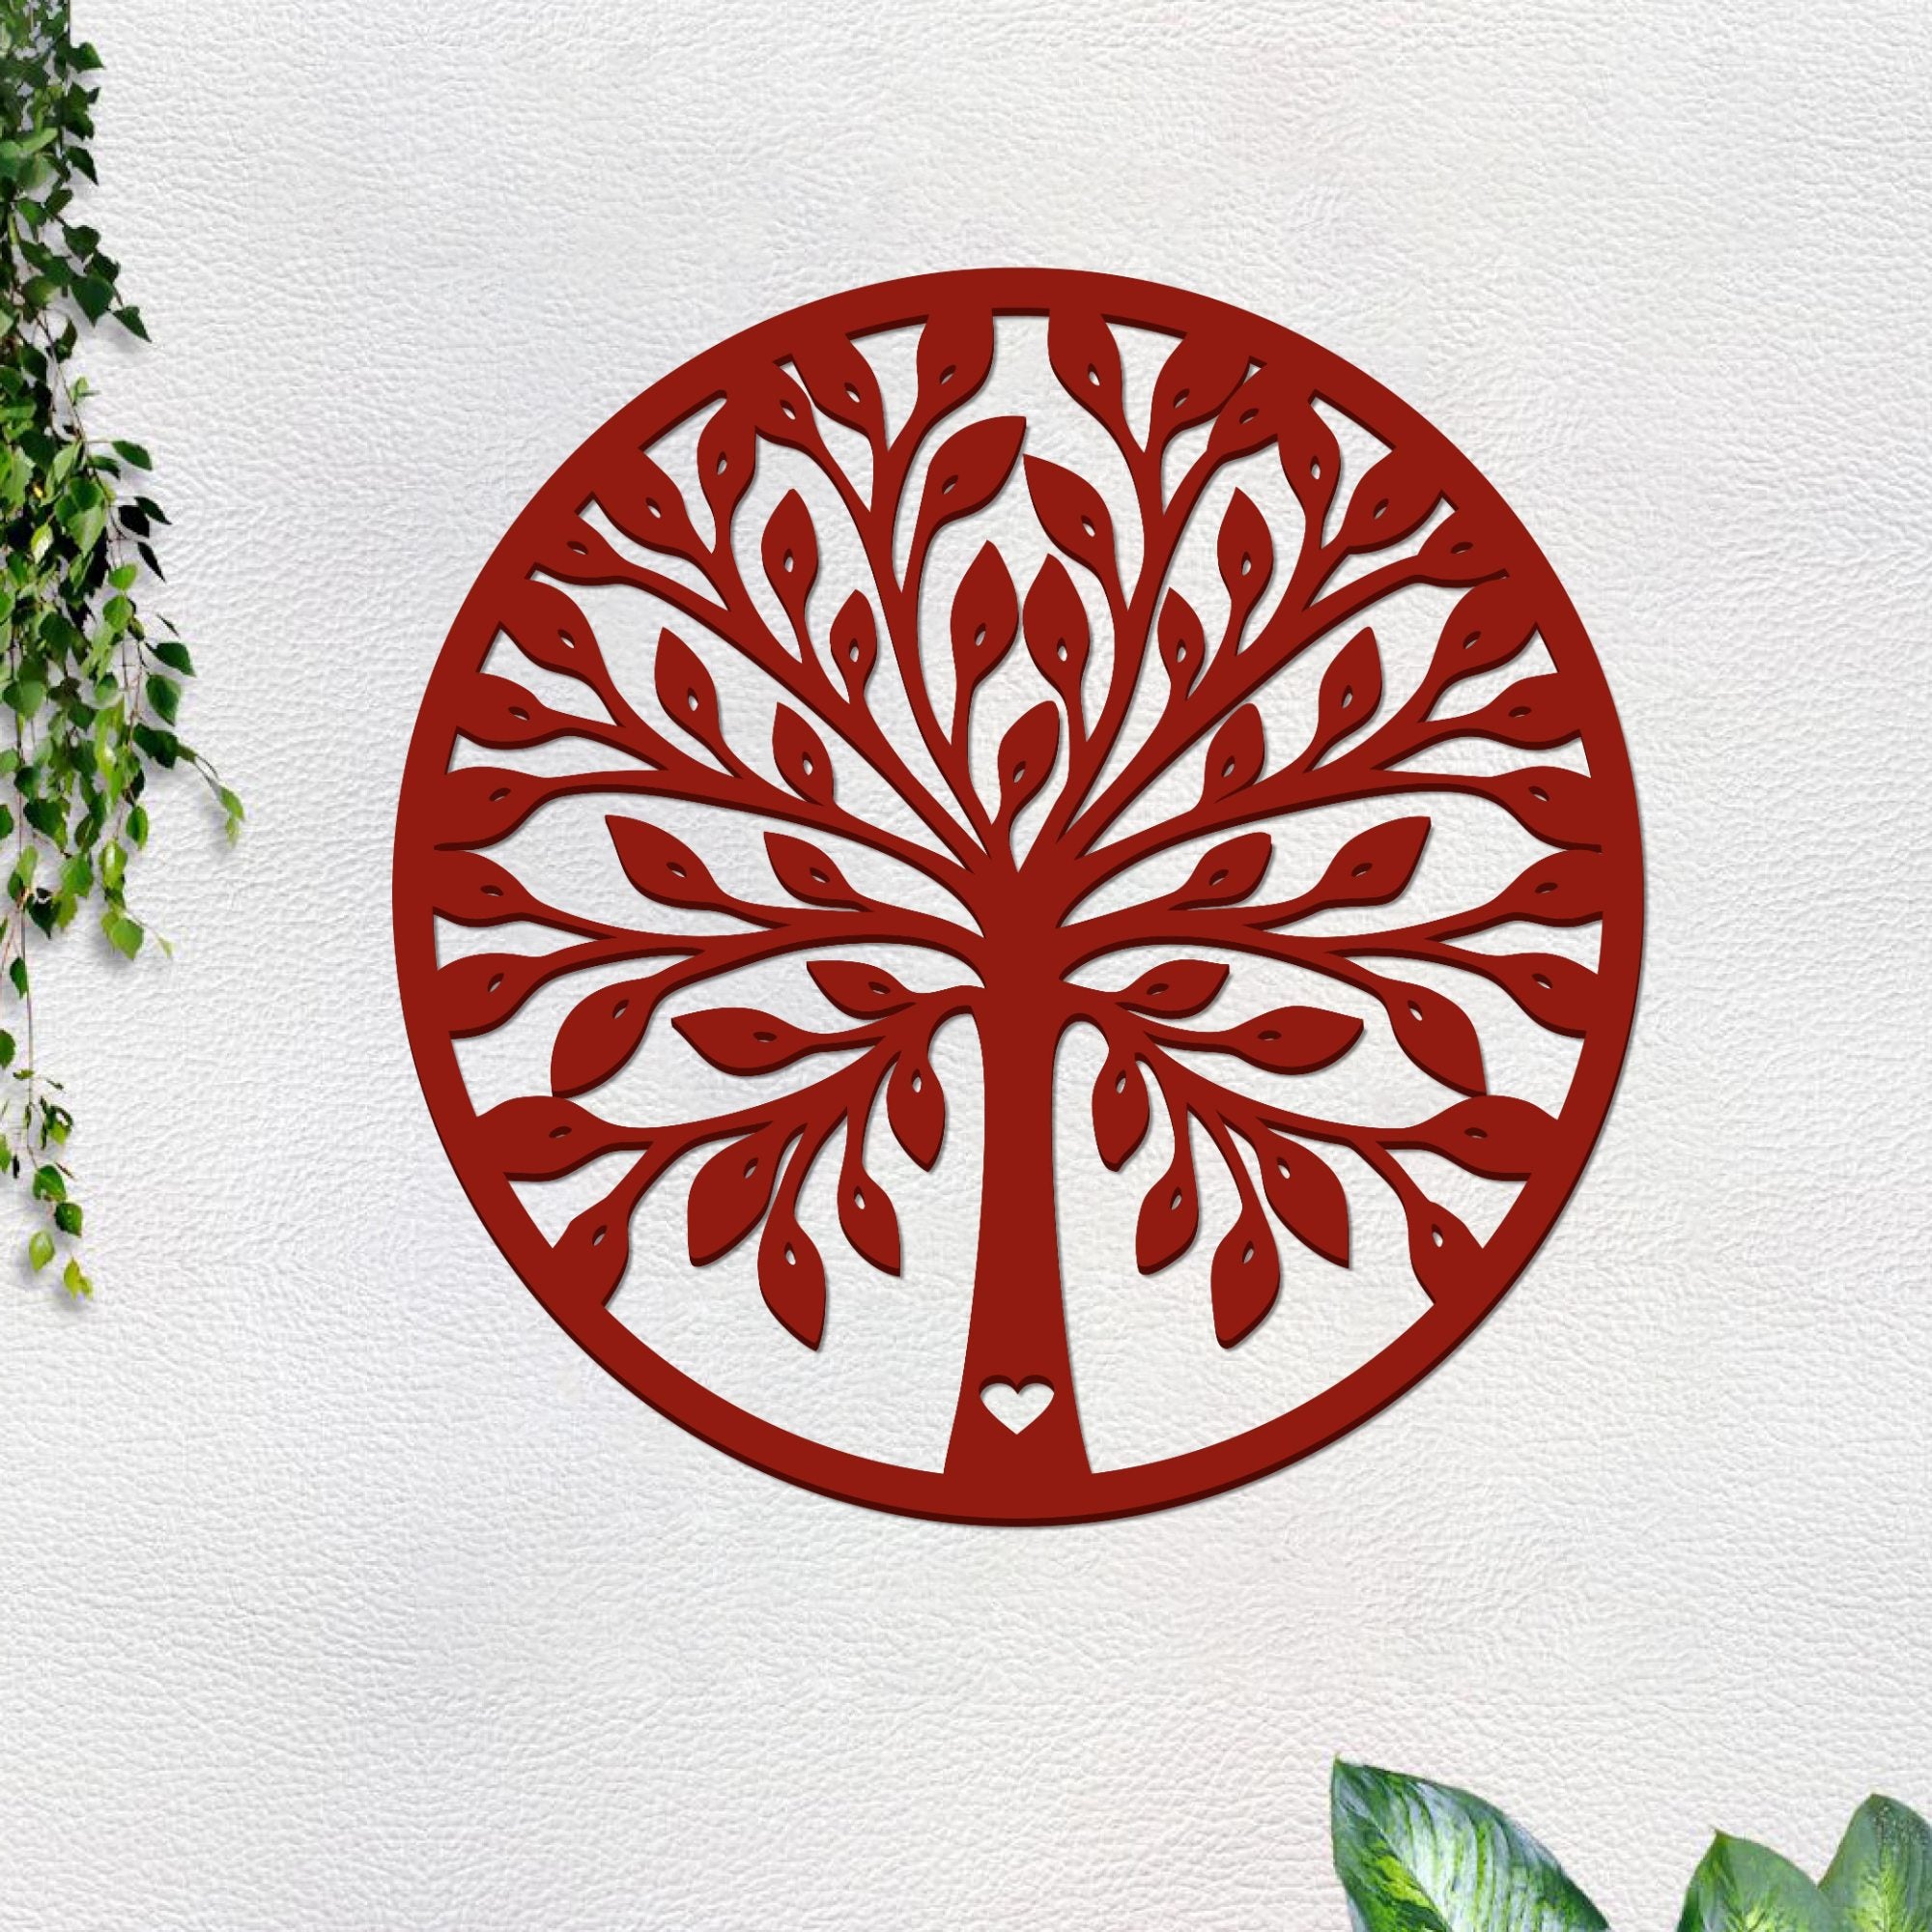  Tree Design in Circle Premium Quality Wooden Wall Hanging